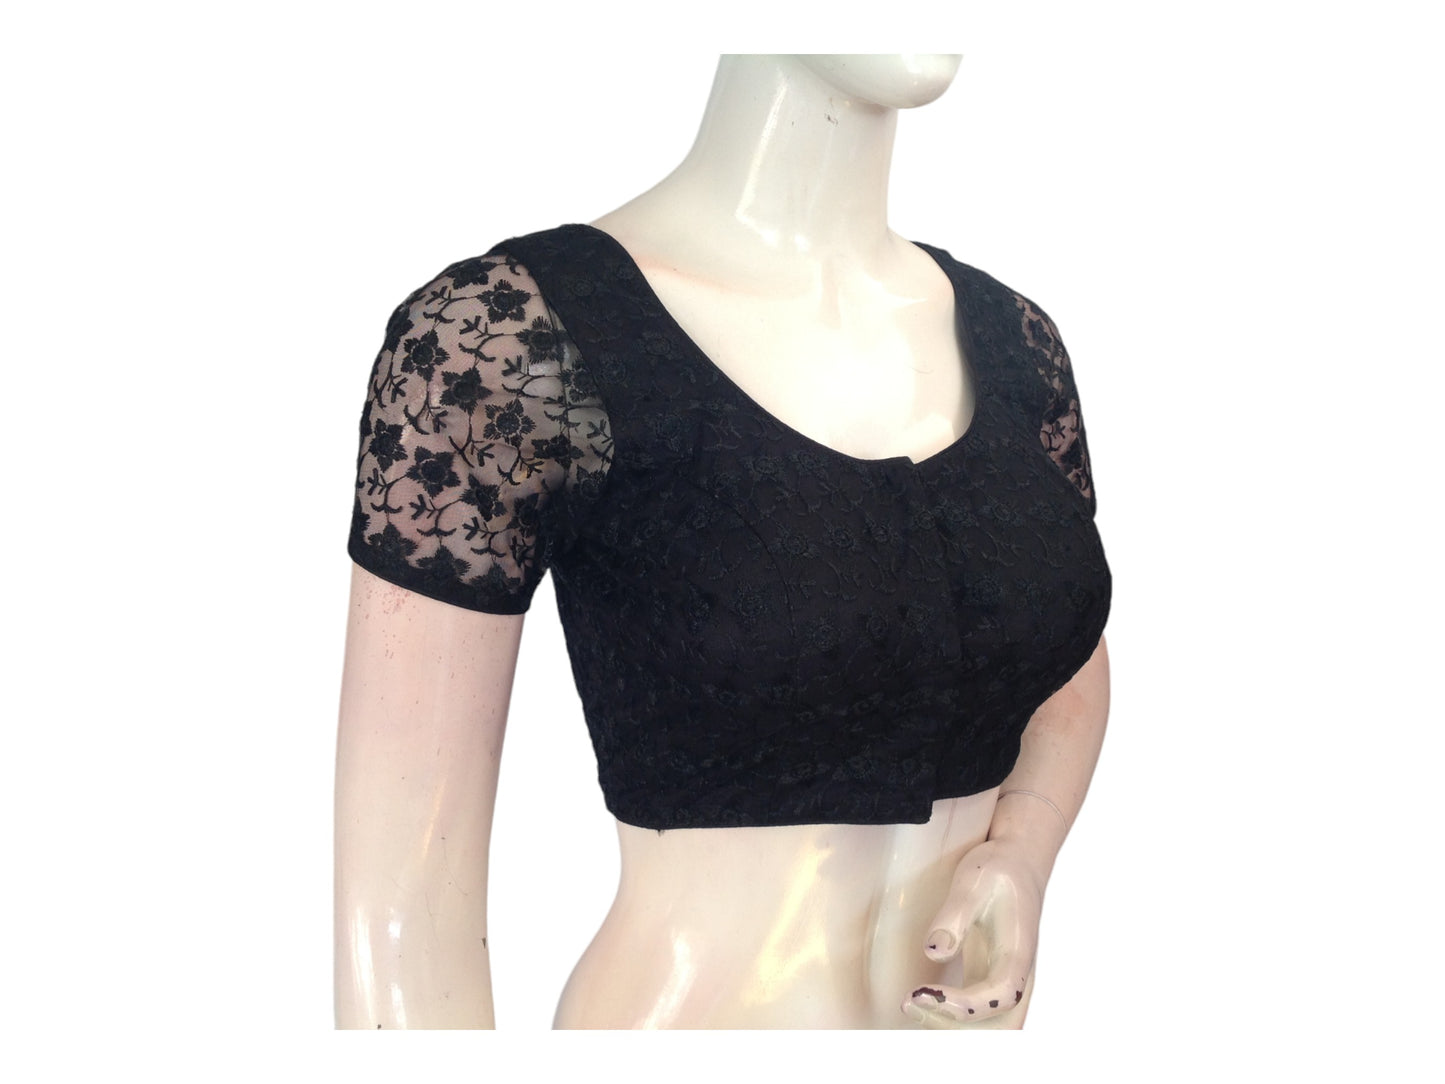 Black Color Floral Netted Embroidery Readymade Saree Blouse, Indian Choli